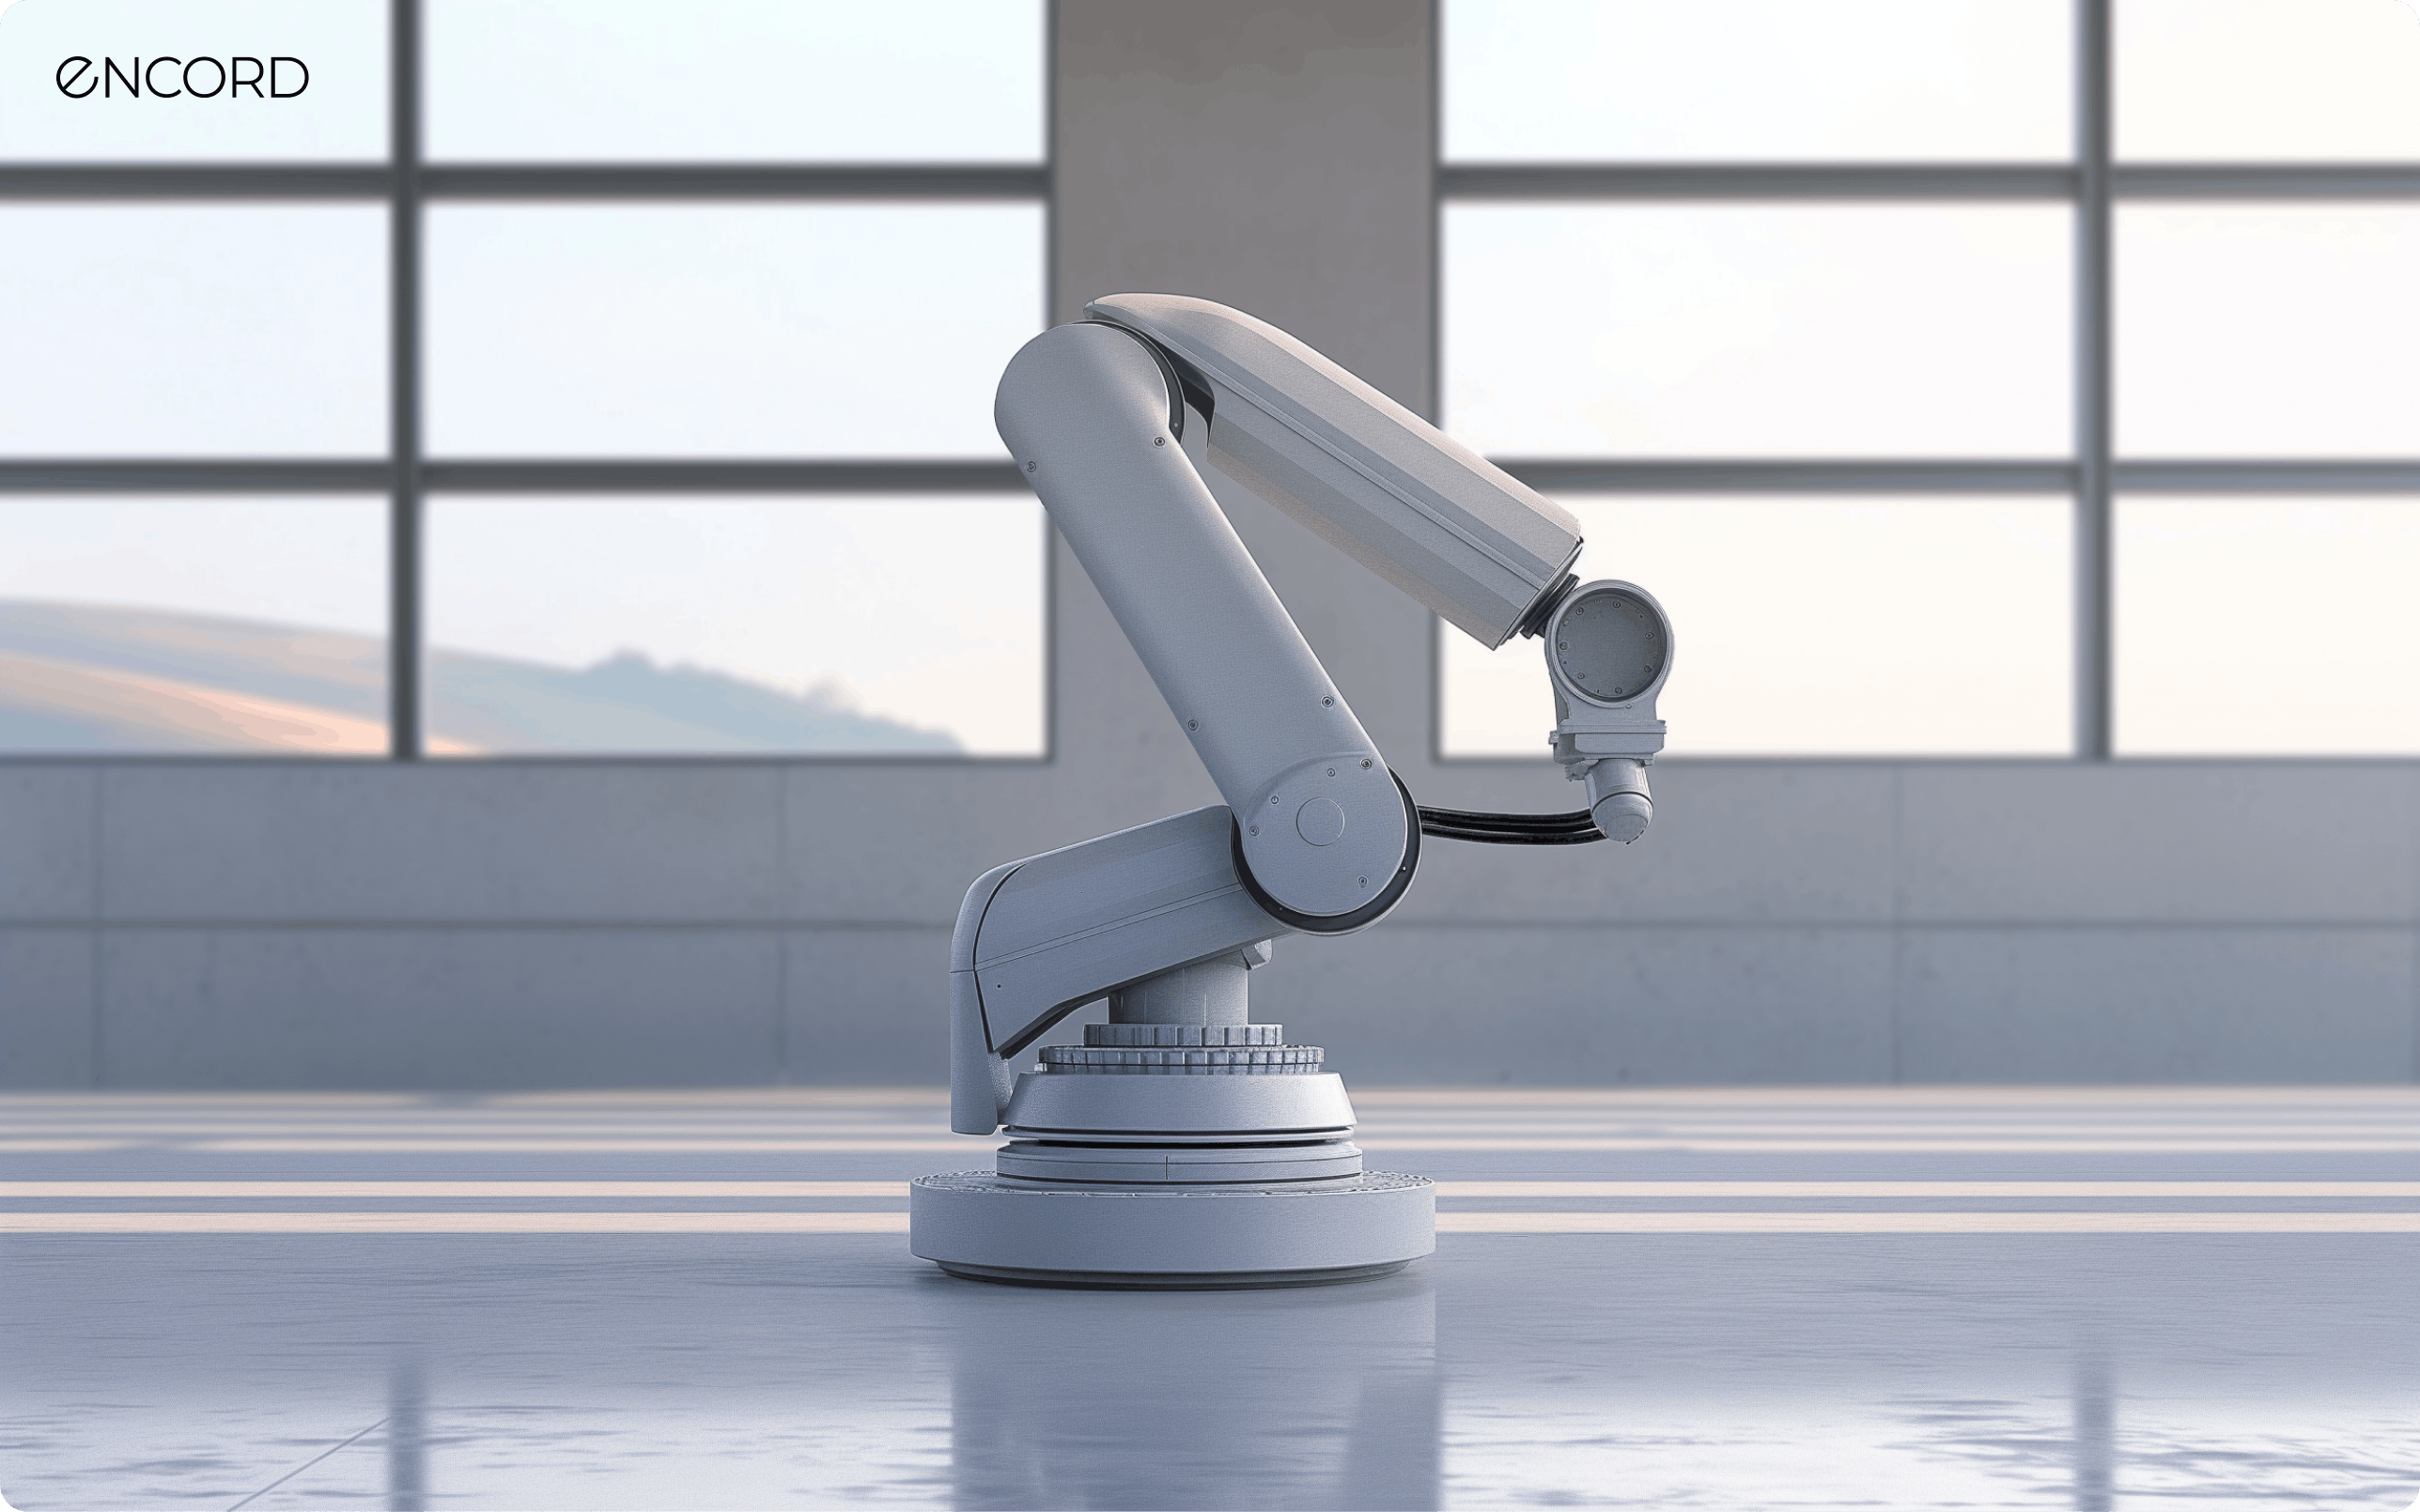 sampleImage_robotic-arm-with-6-degrees-of-freedom-using-computer-vision